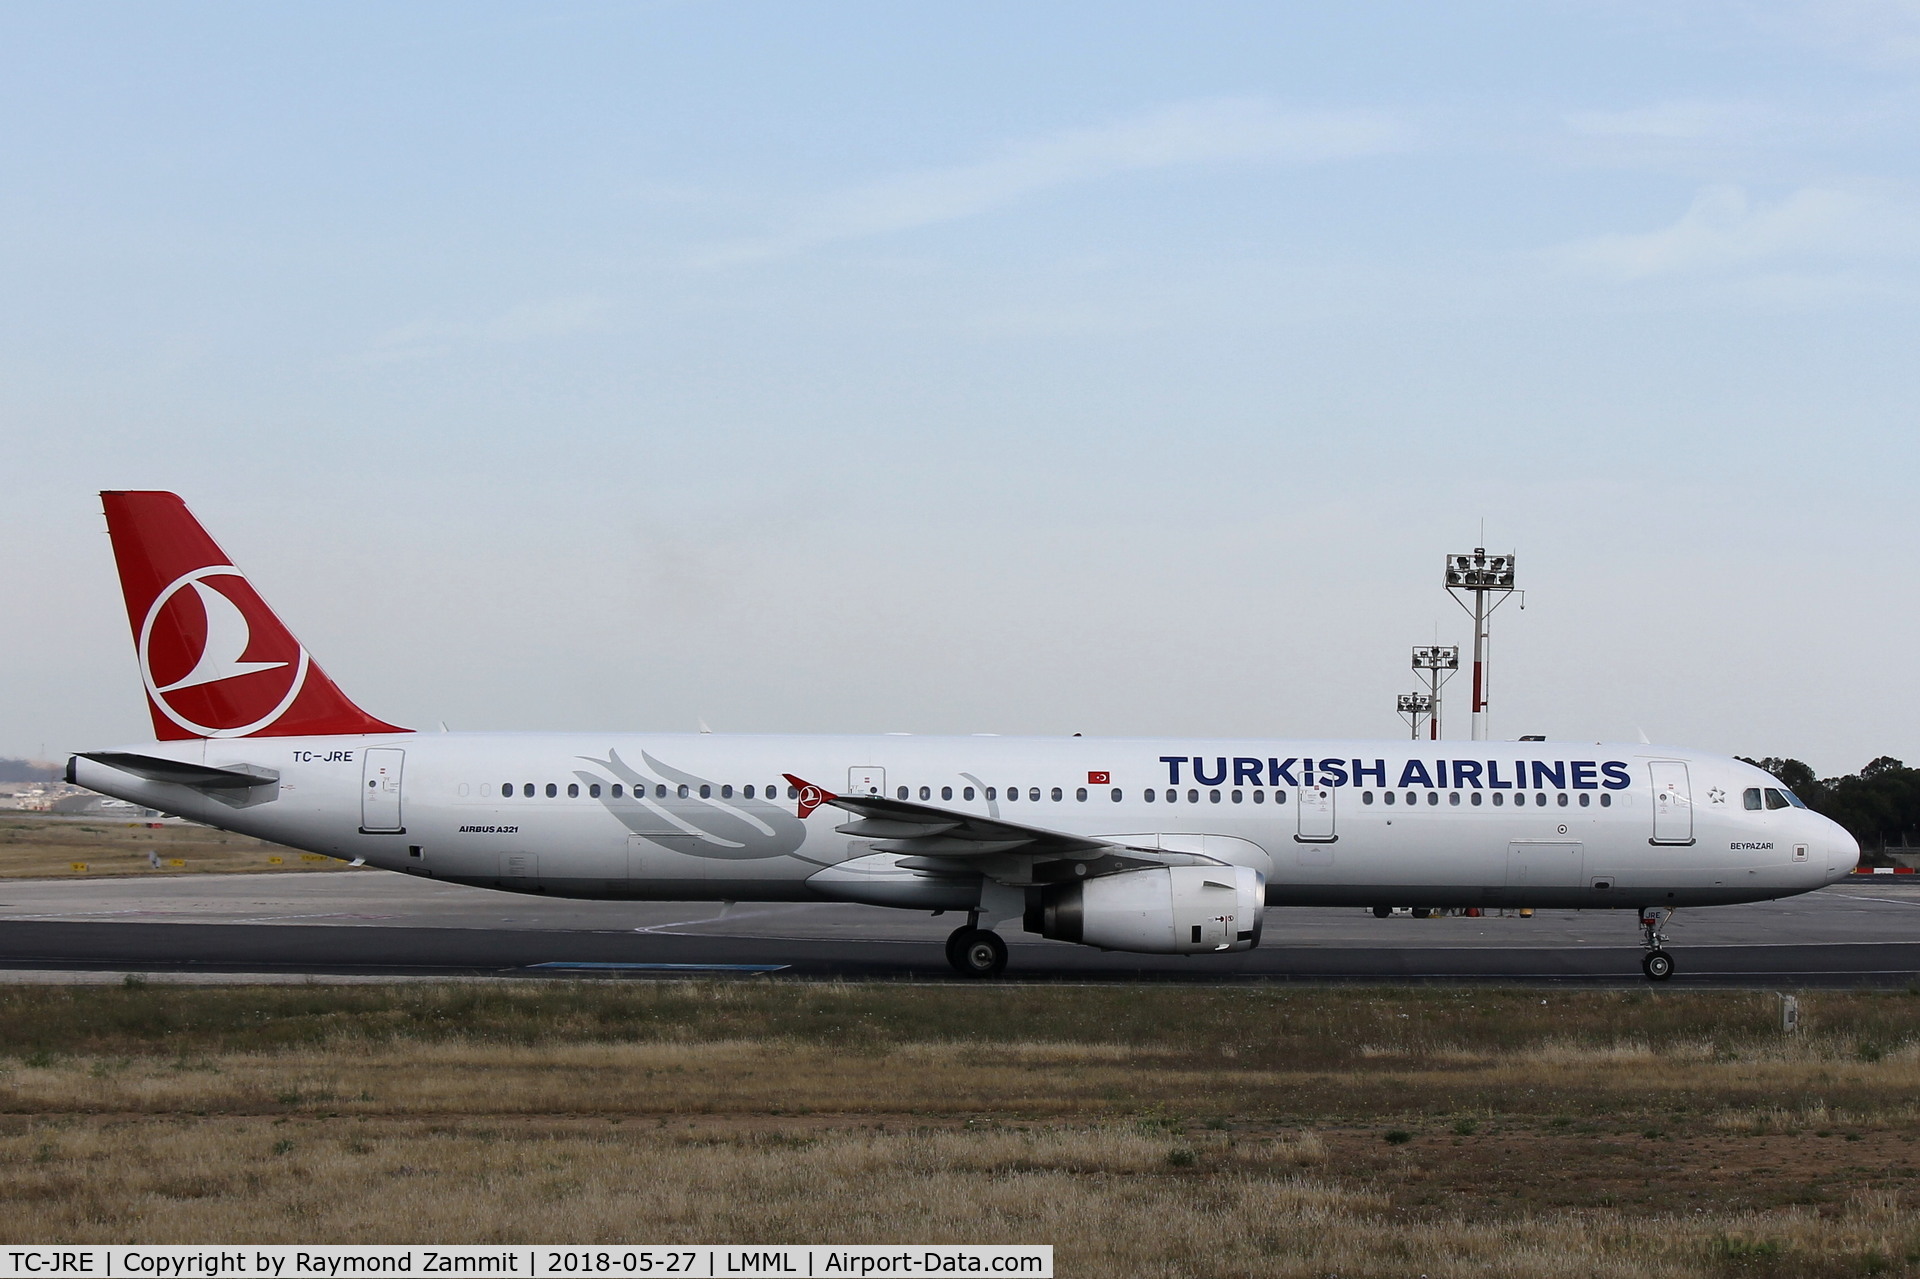 TC-JRE, 2007 Airbus A321-231 C/N 3126, A321 TC-JRE Turkish Airlines